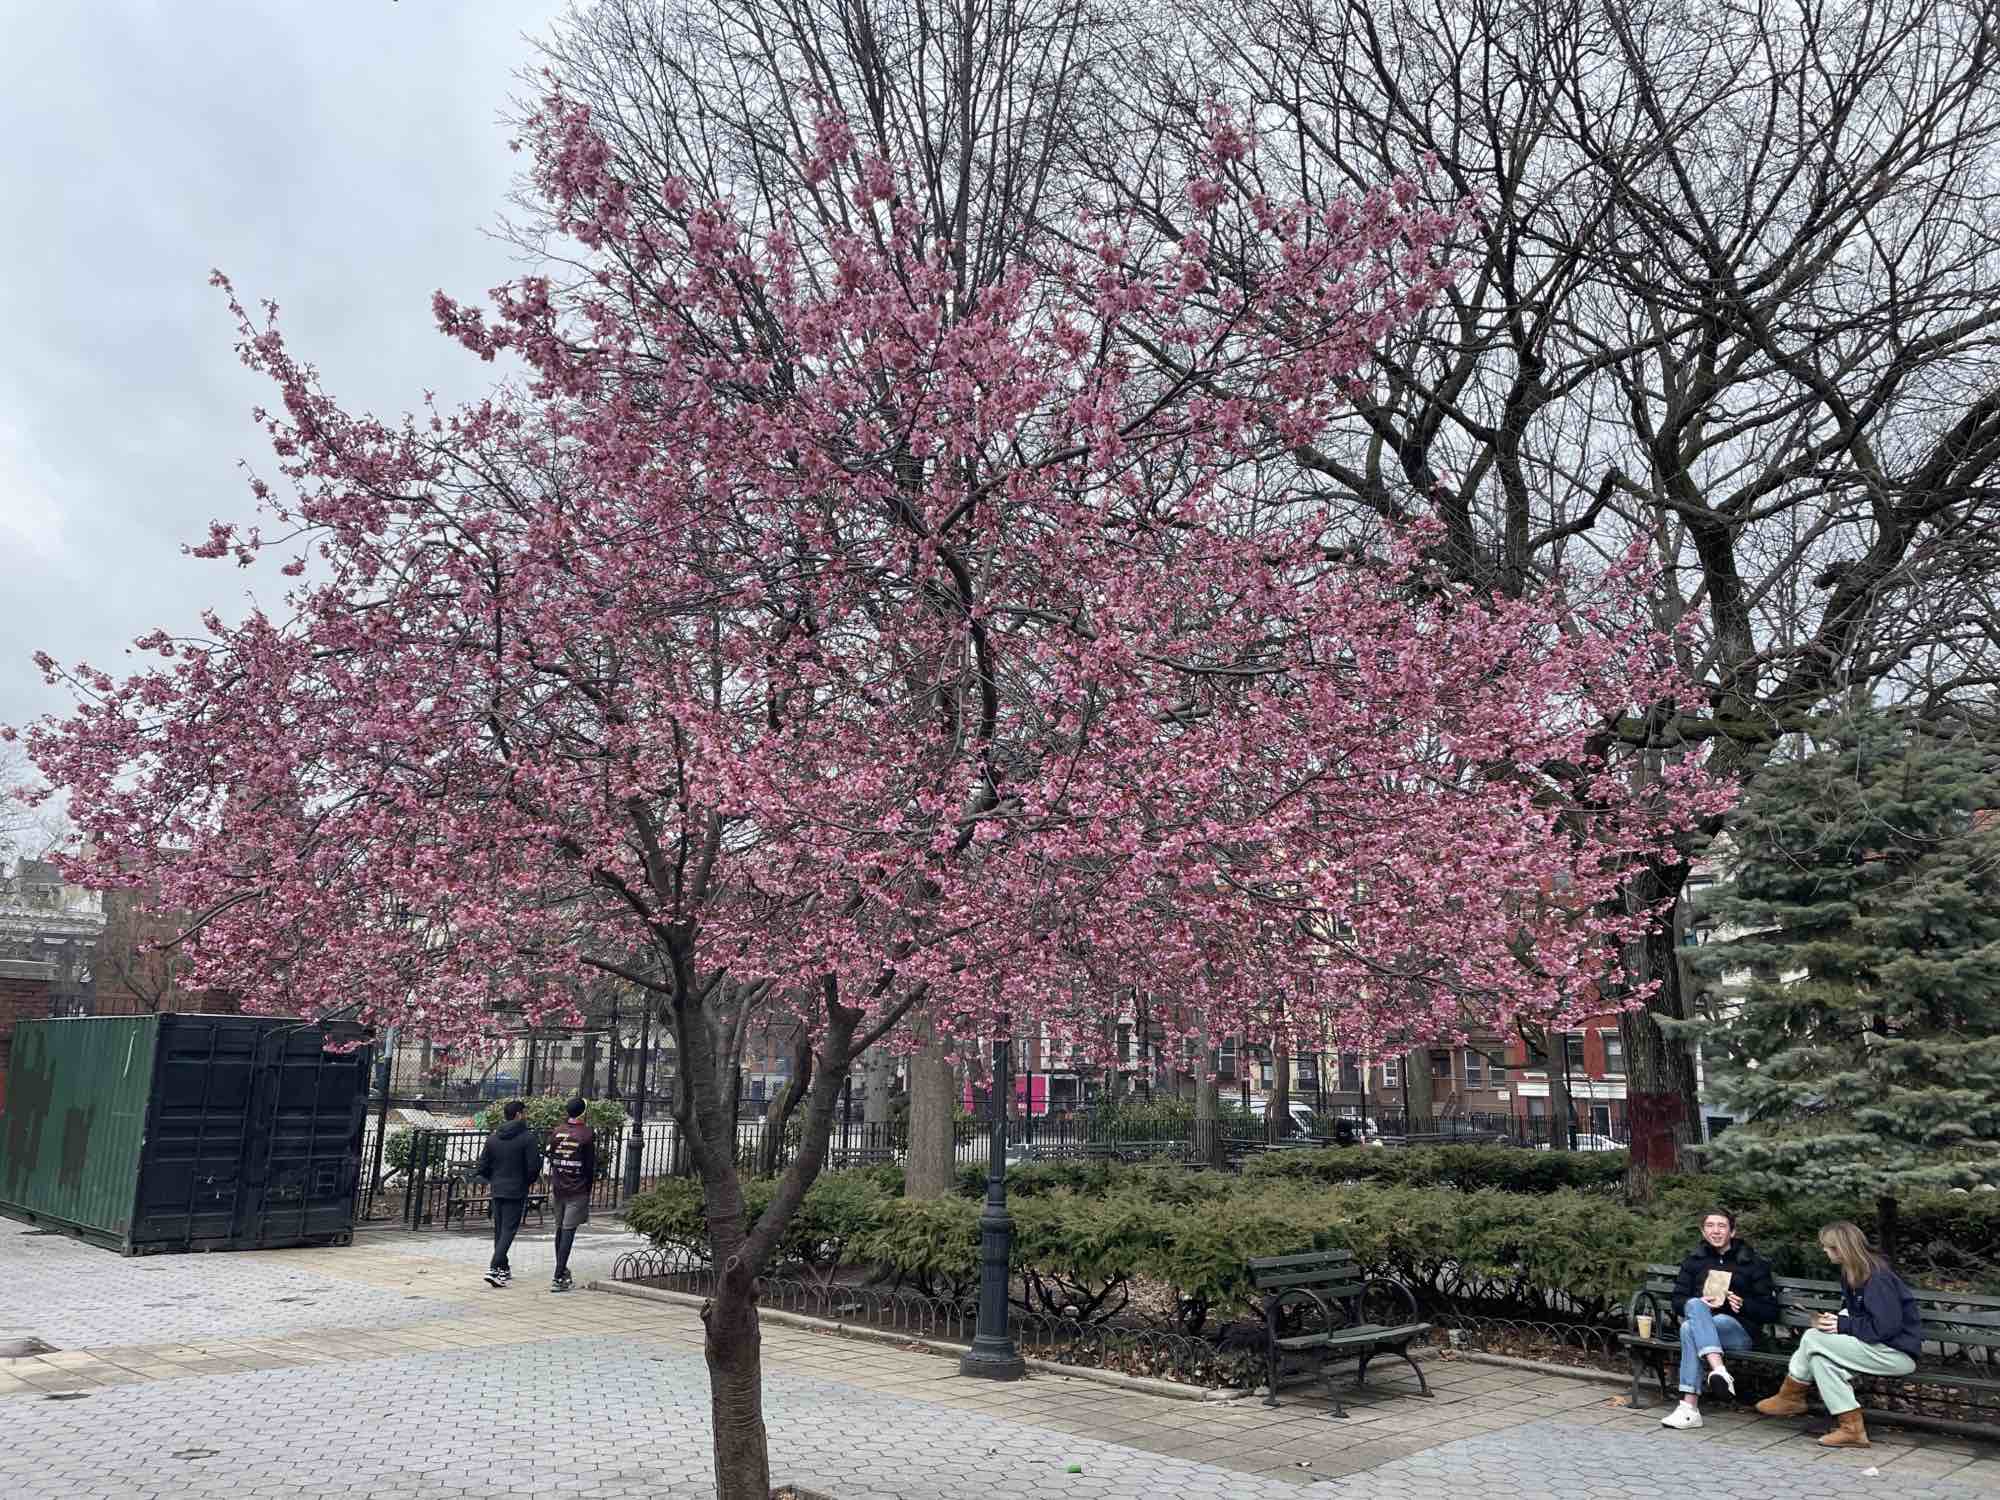 Cherry blossoms in Tompkins Square Park.